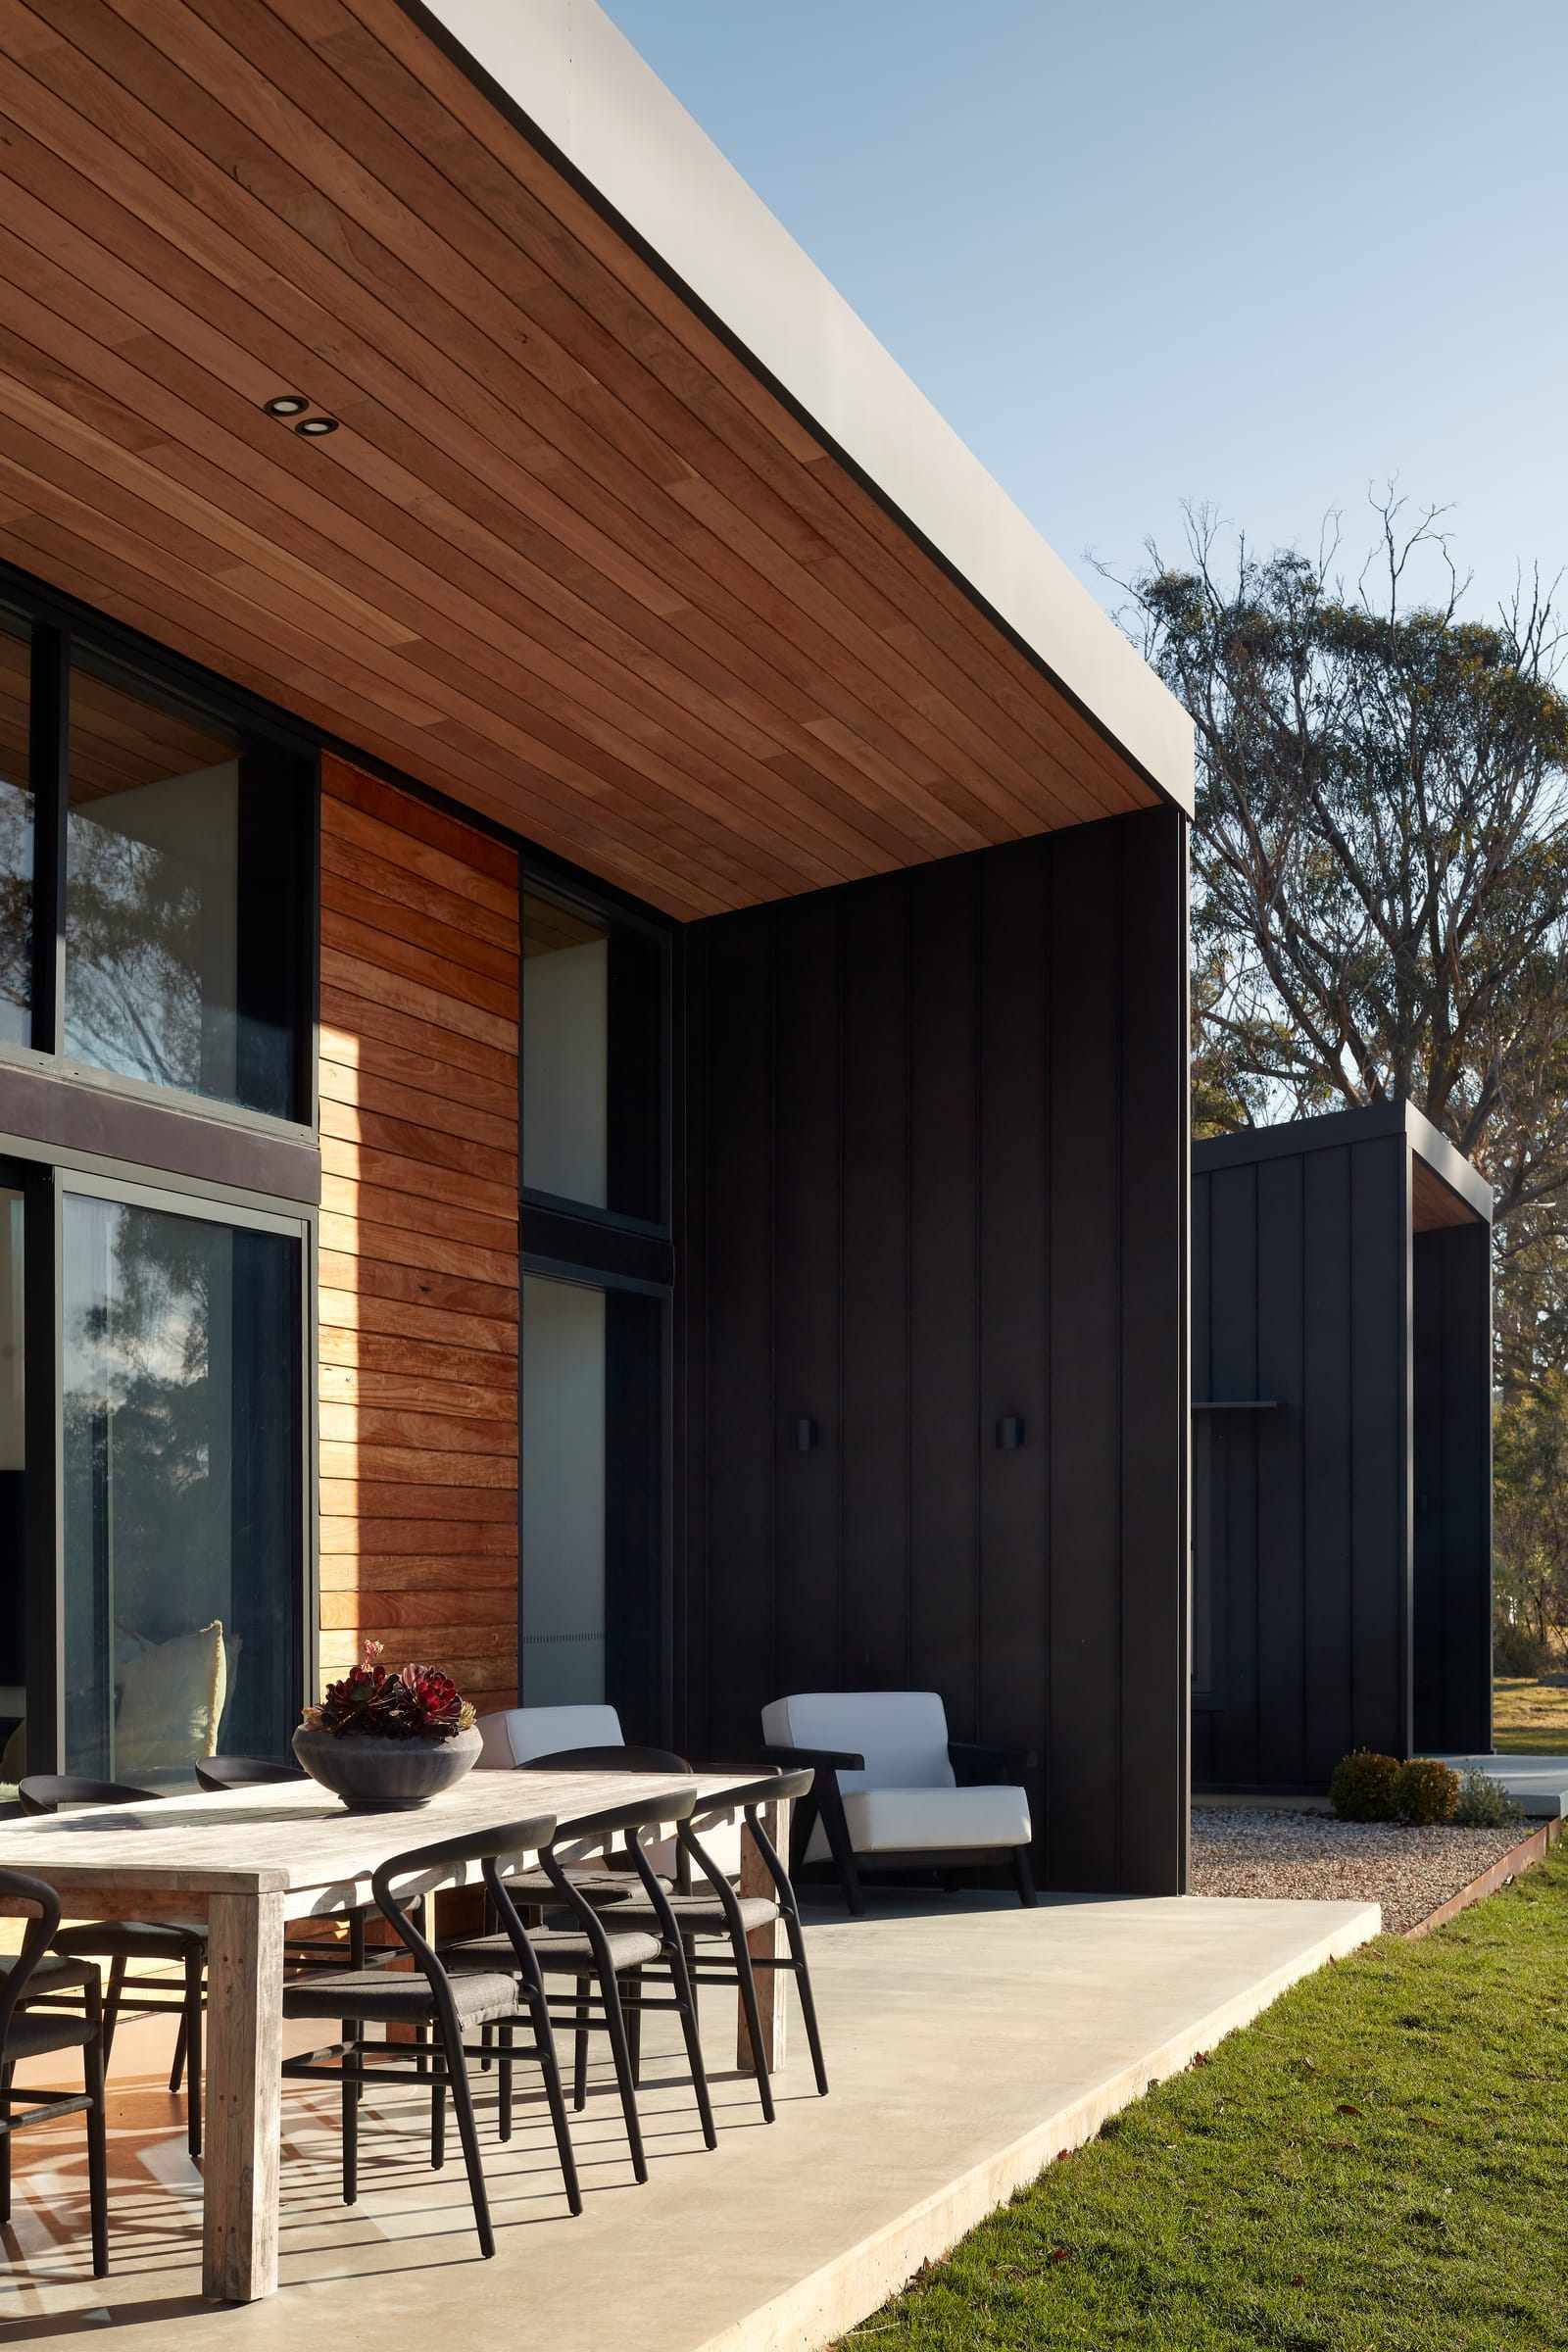 An exterior view of House Woodland by AD Design Studio, highlighting the modern architectural design with a mix of materials. The facade combines wood siding with black metal panels. The house has large windows and sliding doors, integrating indoor and outdoor spaces. A wooden deck extends from the house, furnished with an outdoor dining area.